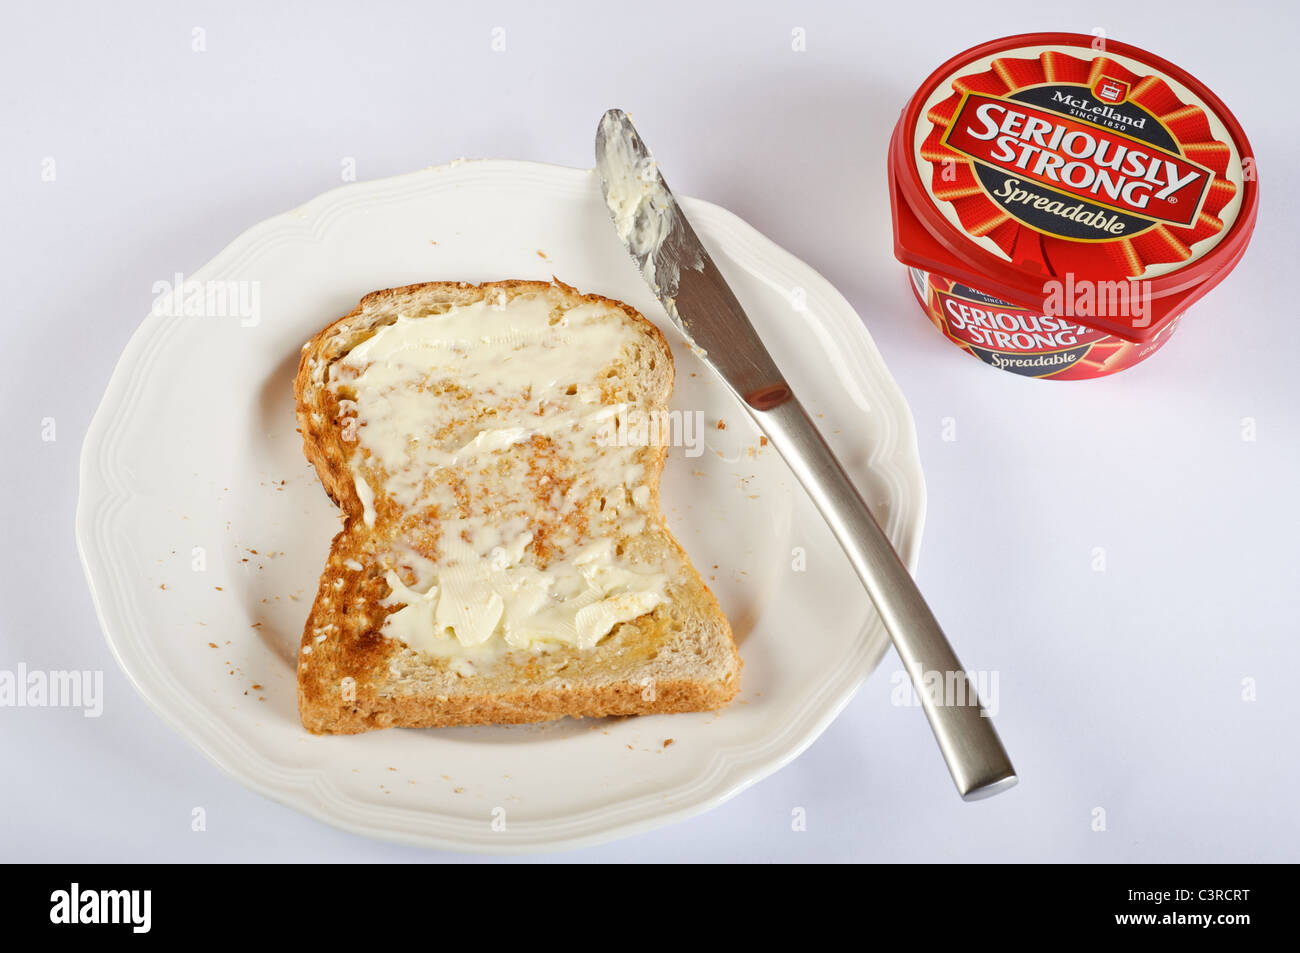 McLelland Seriously Strong cheese spread Stock Photo